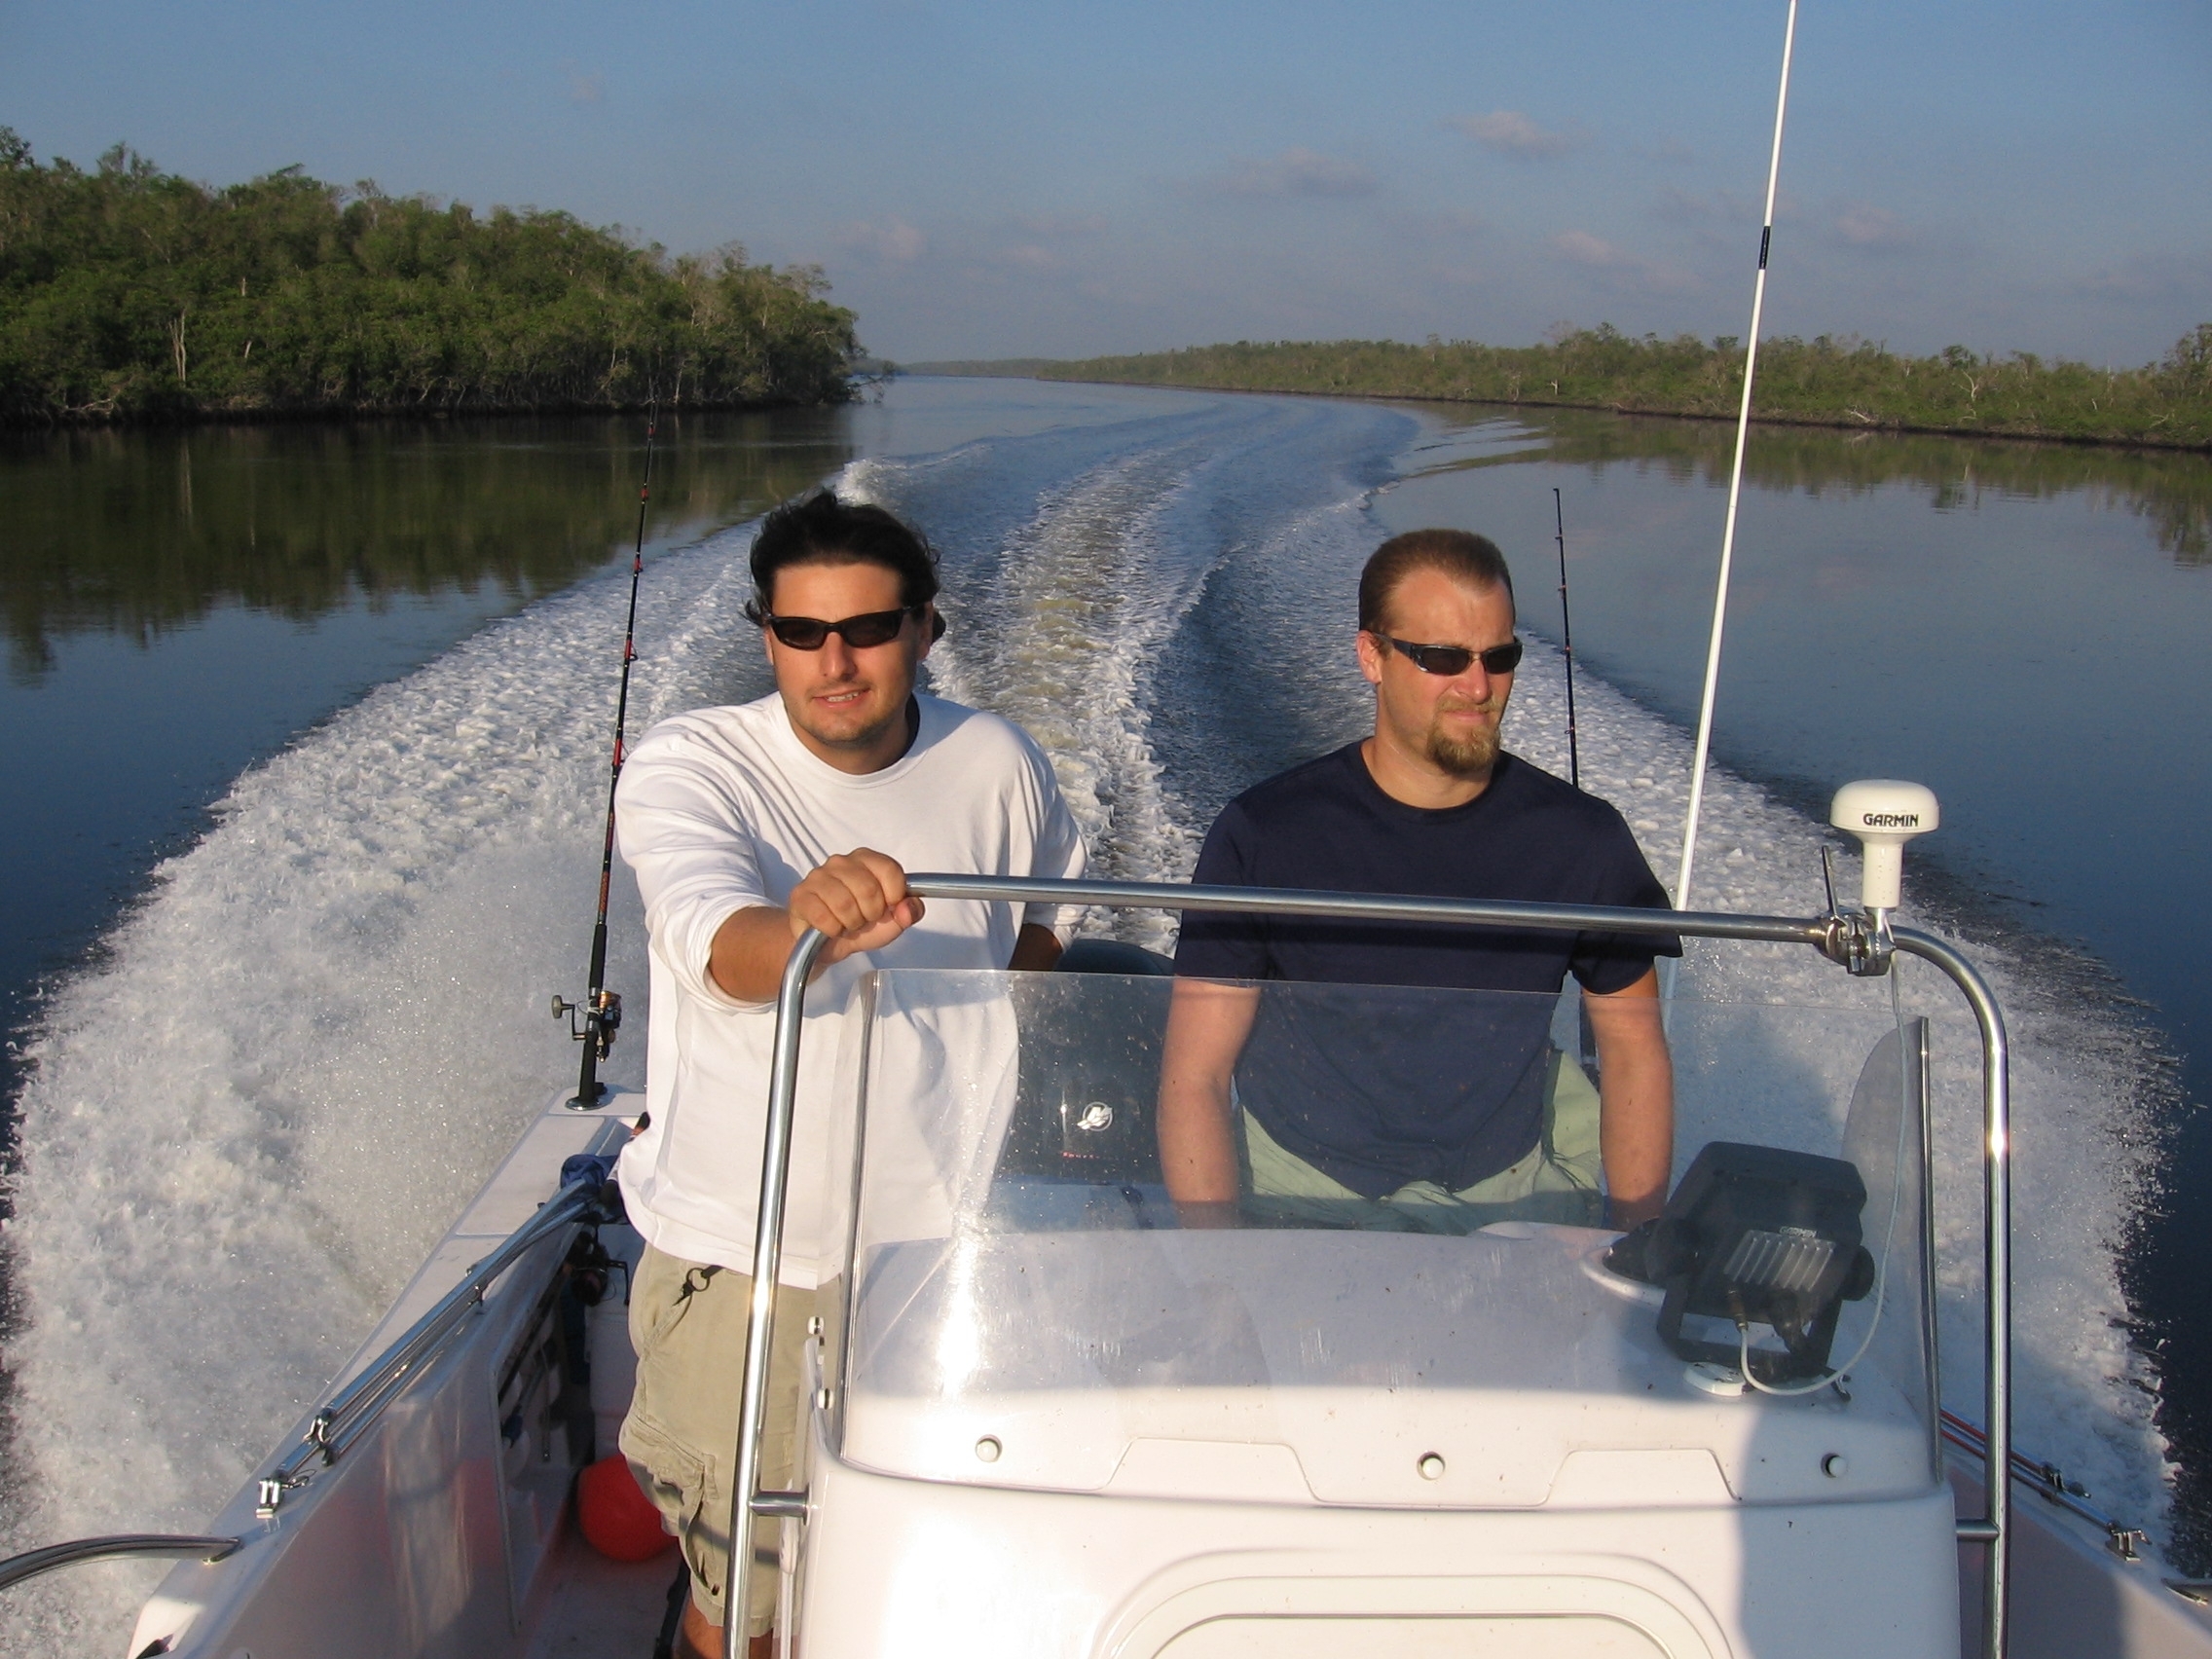 Bryan Delius (M.S. student) and Mike Heithaus going to their study sites, which occur from the mouth of the Shark River to 30 km upstream